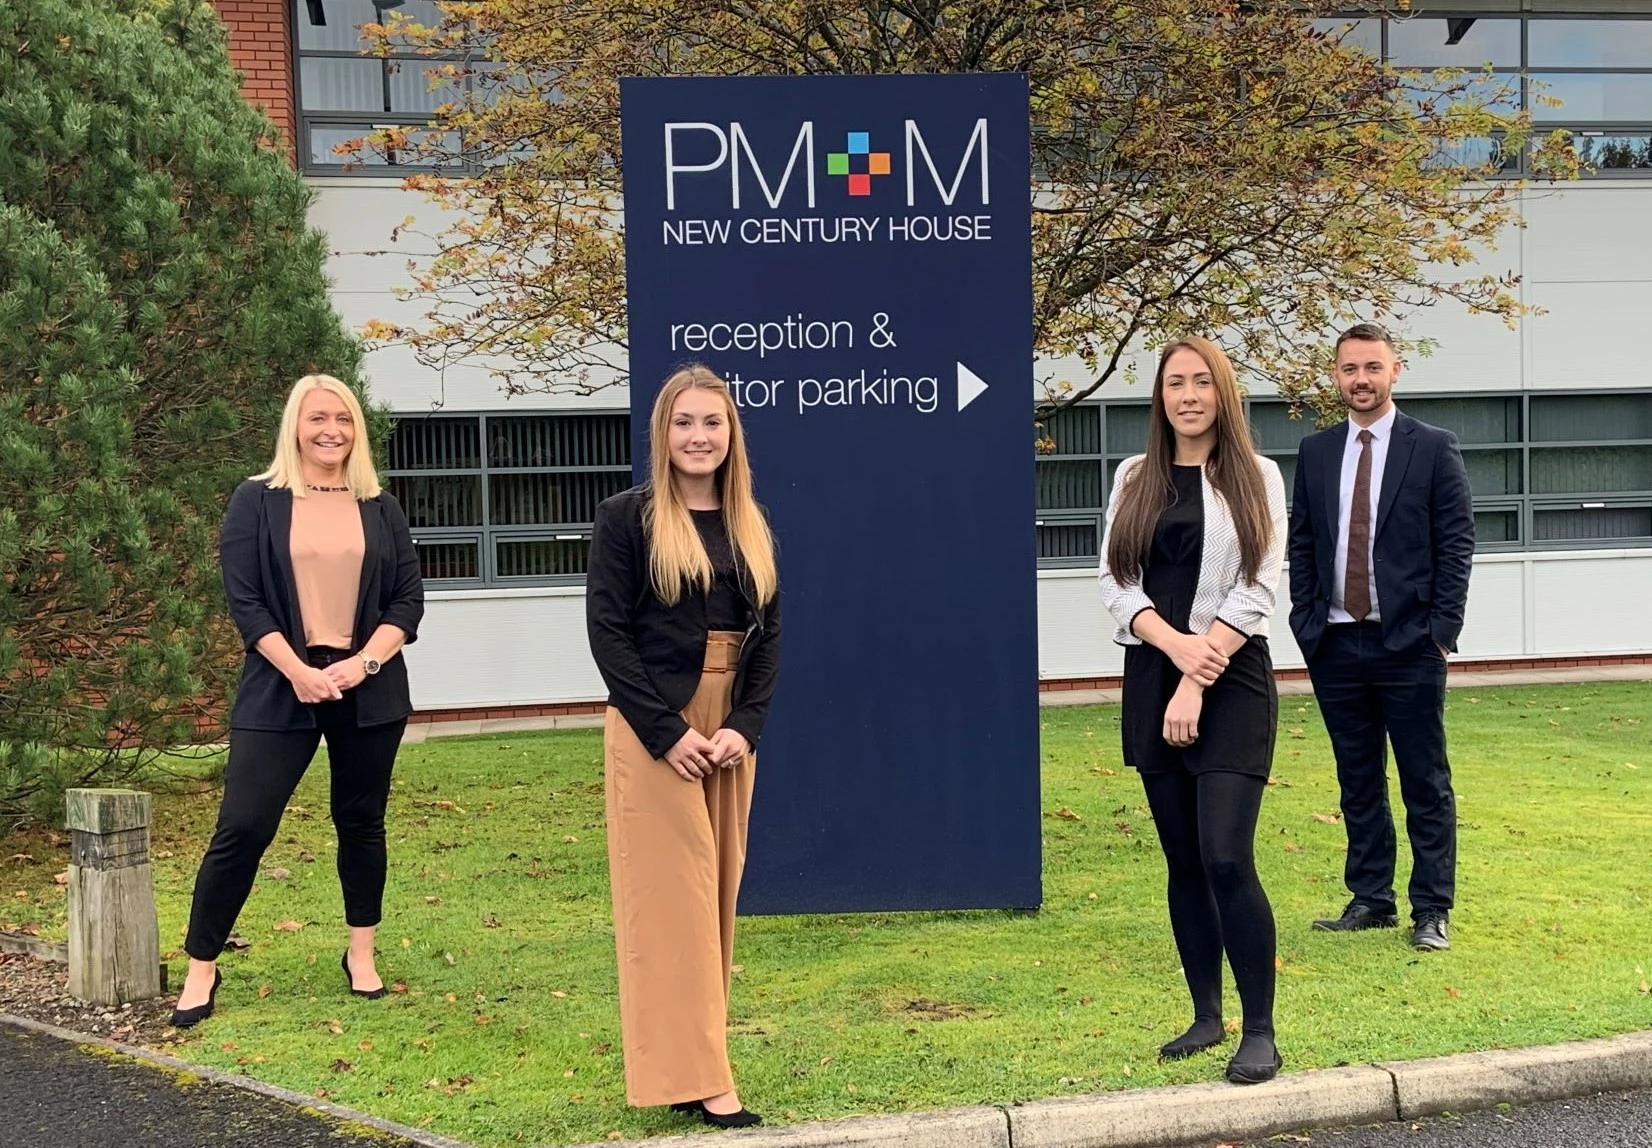 Promotions at PM+M